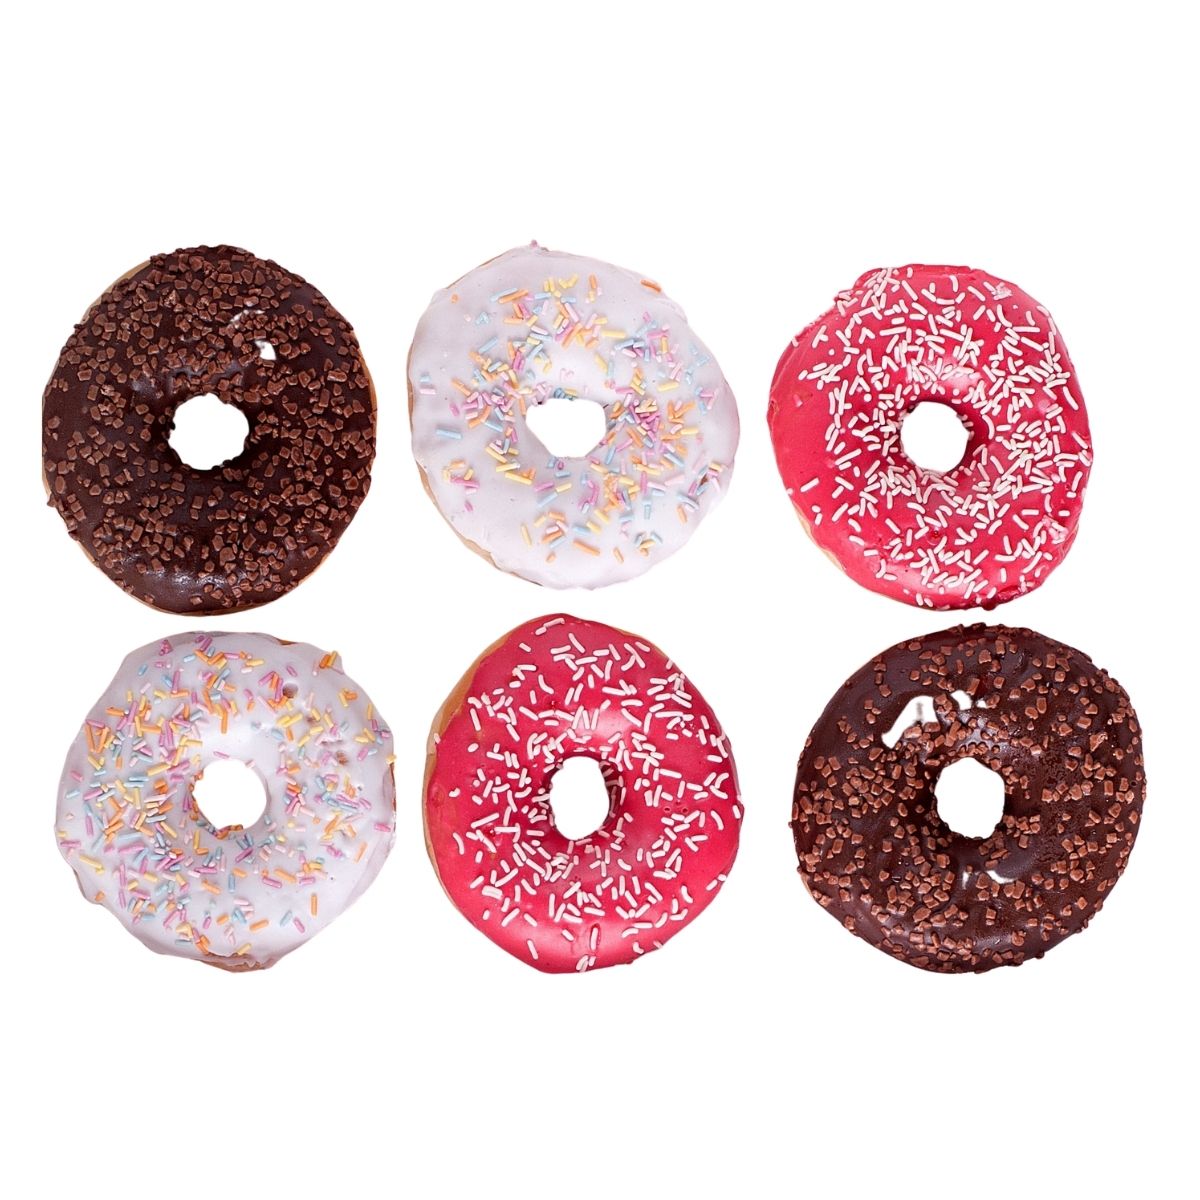 Mixed Iced Donuts x 12. Frozen - CMKfoods